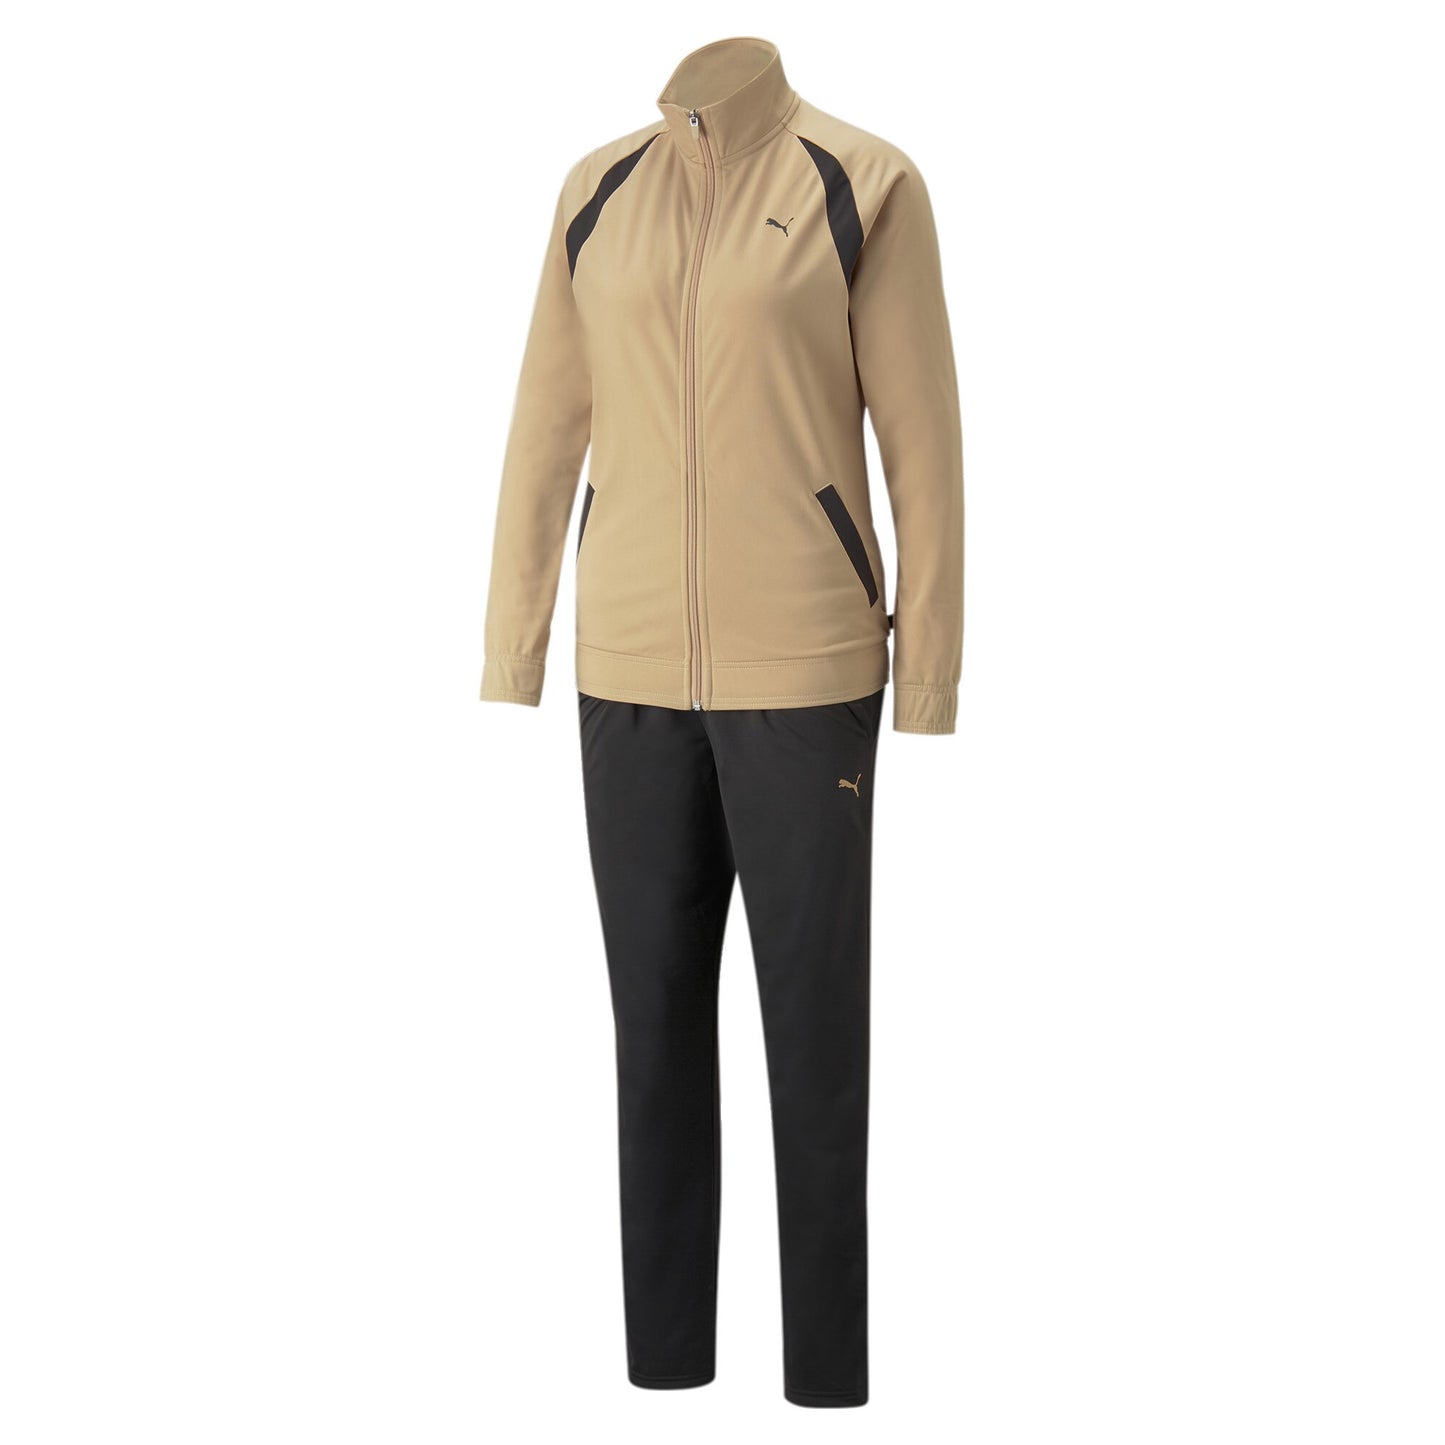 Chándal mujer Puma CLASSIC TRICOT SUIT (3 COLORES)